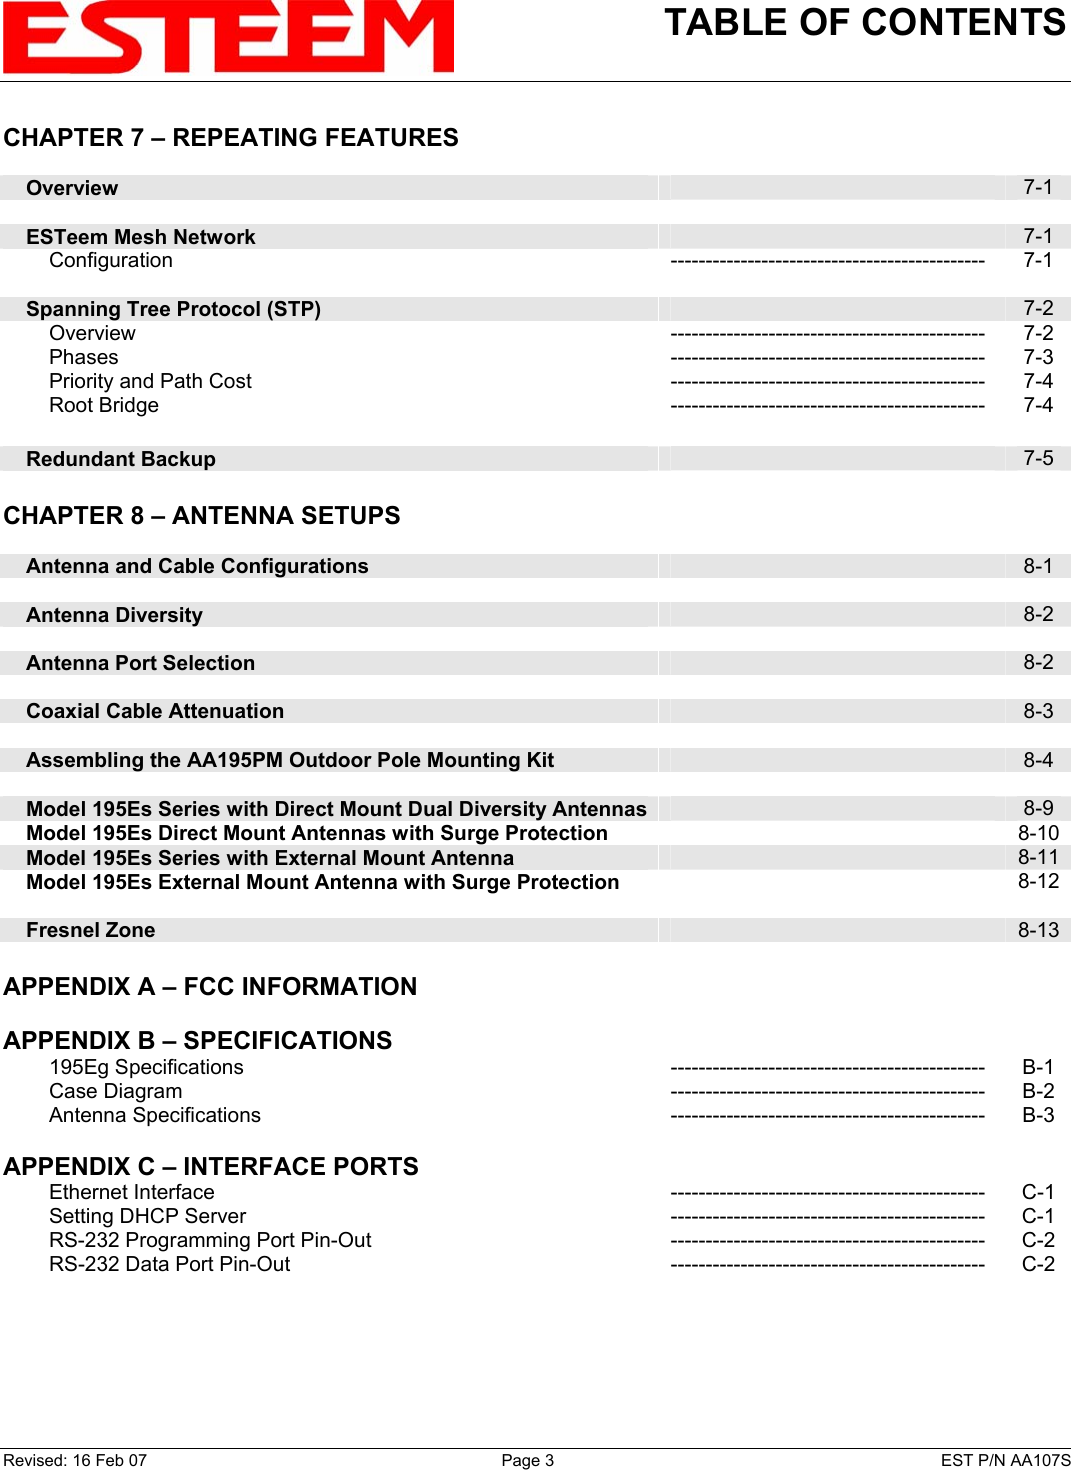 TABLE OF CONTENTS    CHAPTER 7 – REPEATING FEATURES          Overview   7-1        ESTeem Mesh Network   7-1         Configuration --------------------------------------------- 7-1        Spanning Tree Protocol (STP)   7-2         Overview --------------------------------------------- 7-2         Phases --------------------------------------------- 7-3         Priority and Path Cost --------------------------------------------- 7-4         Root Bridge --------------------------------------------- 7-4        Redundant Backup   7-5    CHAPTER 8 – ANTENNA SETUPS          Antenna and Cable Configurations   8-1        Antenna Diversity   8-2        Antenna Port Selection   8-2        Coaxial Cable Attenuation   8-3        Assembling the AA195PM Outdoor Pole Mounting Kit   8-4        Model 195Es Series with Direct Mount Dual Diversity Antennas  8-9     Model 195Es Direct Mount Antennas with Surge Protection  8-10    Model 195Es Series with External Mount Antenna   8-11    Model 195Es External Mount Antenna with Surge Protection   8-12         Fresnel Zone    8-13   APPENDIX A – FCC INFORMATION       APPENDIX B – SPECIFICATIONS            195Eg Specifications --------------------------------------------- B-1         Case Diagram  ---------------------------------------------  B-2         Antenna Specifications --------------------------------------------- B-3    APPENDIX C – INTERFACE PORTS            Ethernet Interface --------------------------------------------- C-1         Setting DHCP Server  ---------------------------------------------  C-1         RS-232 Programming Port Pin-Out --------------------------------------------- C-2         RS-232 Data Port Pin-Out --------------------------------------------- C-2             Revised: 16 Feb 07  Page 3  EST P/N AA107S 